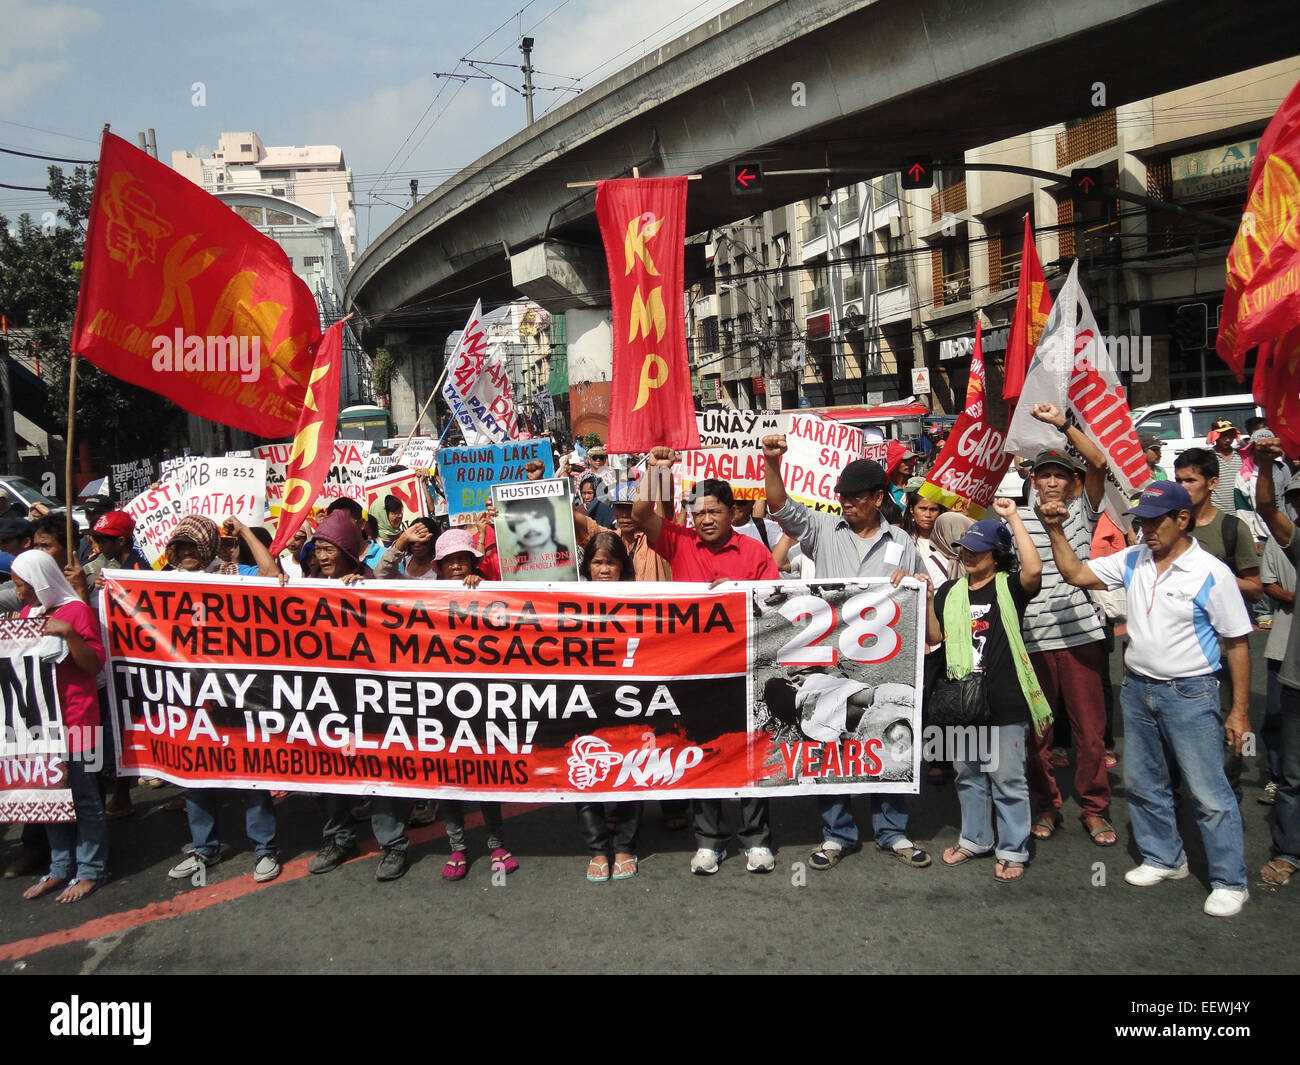 Protesters from the militant Kilusang Magbubukid ng Pilipinas (Peasant Movement of the Philippines) arrive at Mendiola bridge as they commemorate the 28th anniversary of the Mendiola Massacre that occured under the administration of President Benigno Aquino III's mother, former President Corazon Aquino, where thirteen farmers were killed. Anakpawis Partylist representative Fernando Hicap has filed a bill at Congress proposing to declare January 22, the anniversary of the Mendiola Massacre, a special holiday called 'Farmer's Day.' © Richard James Mendoza/Pacific Press/Alamy Live News Stock Photo